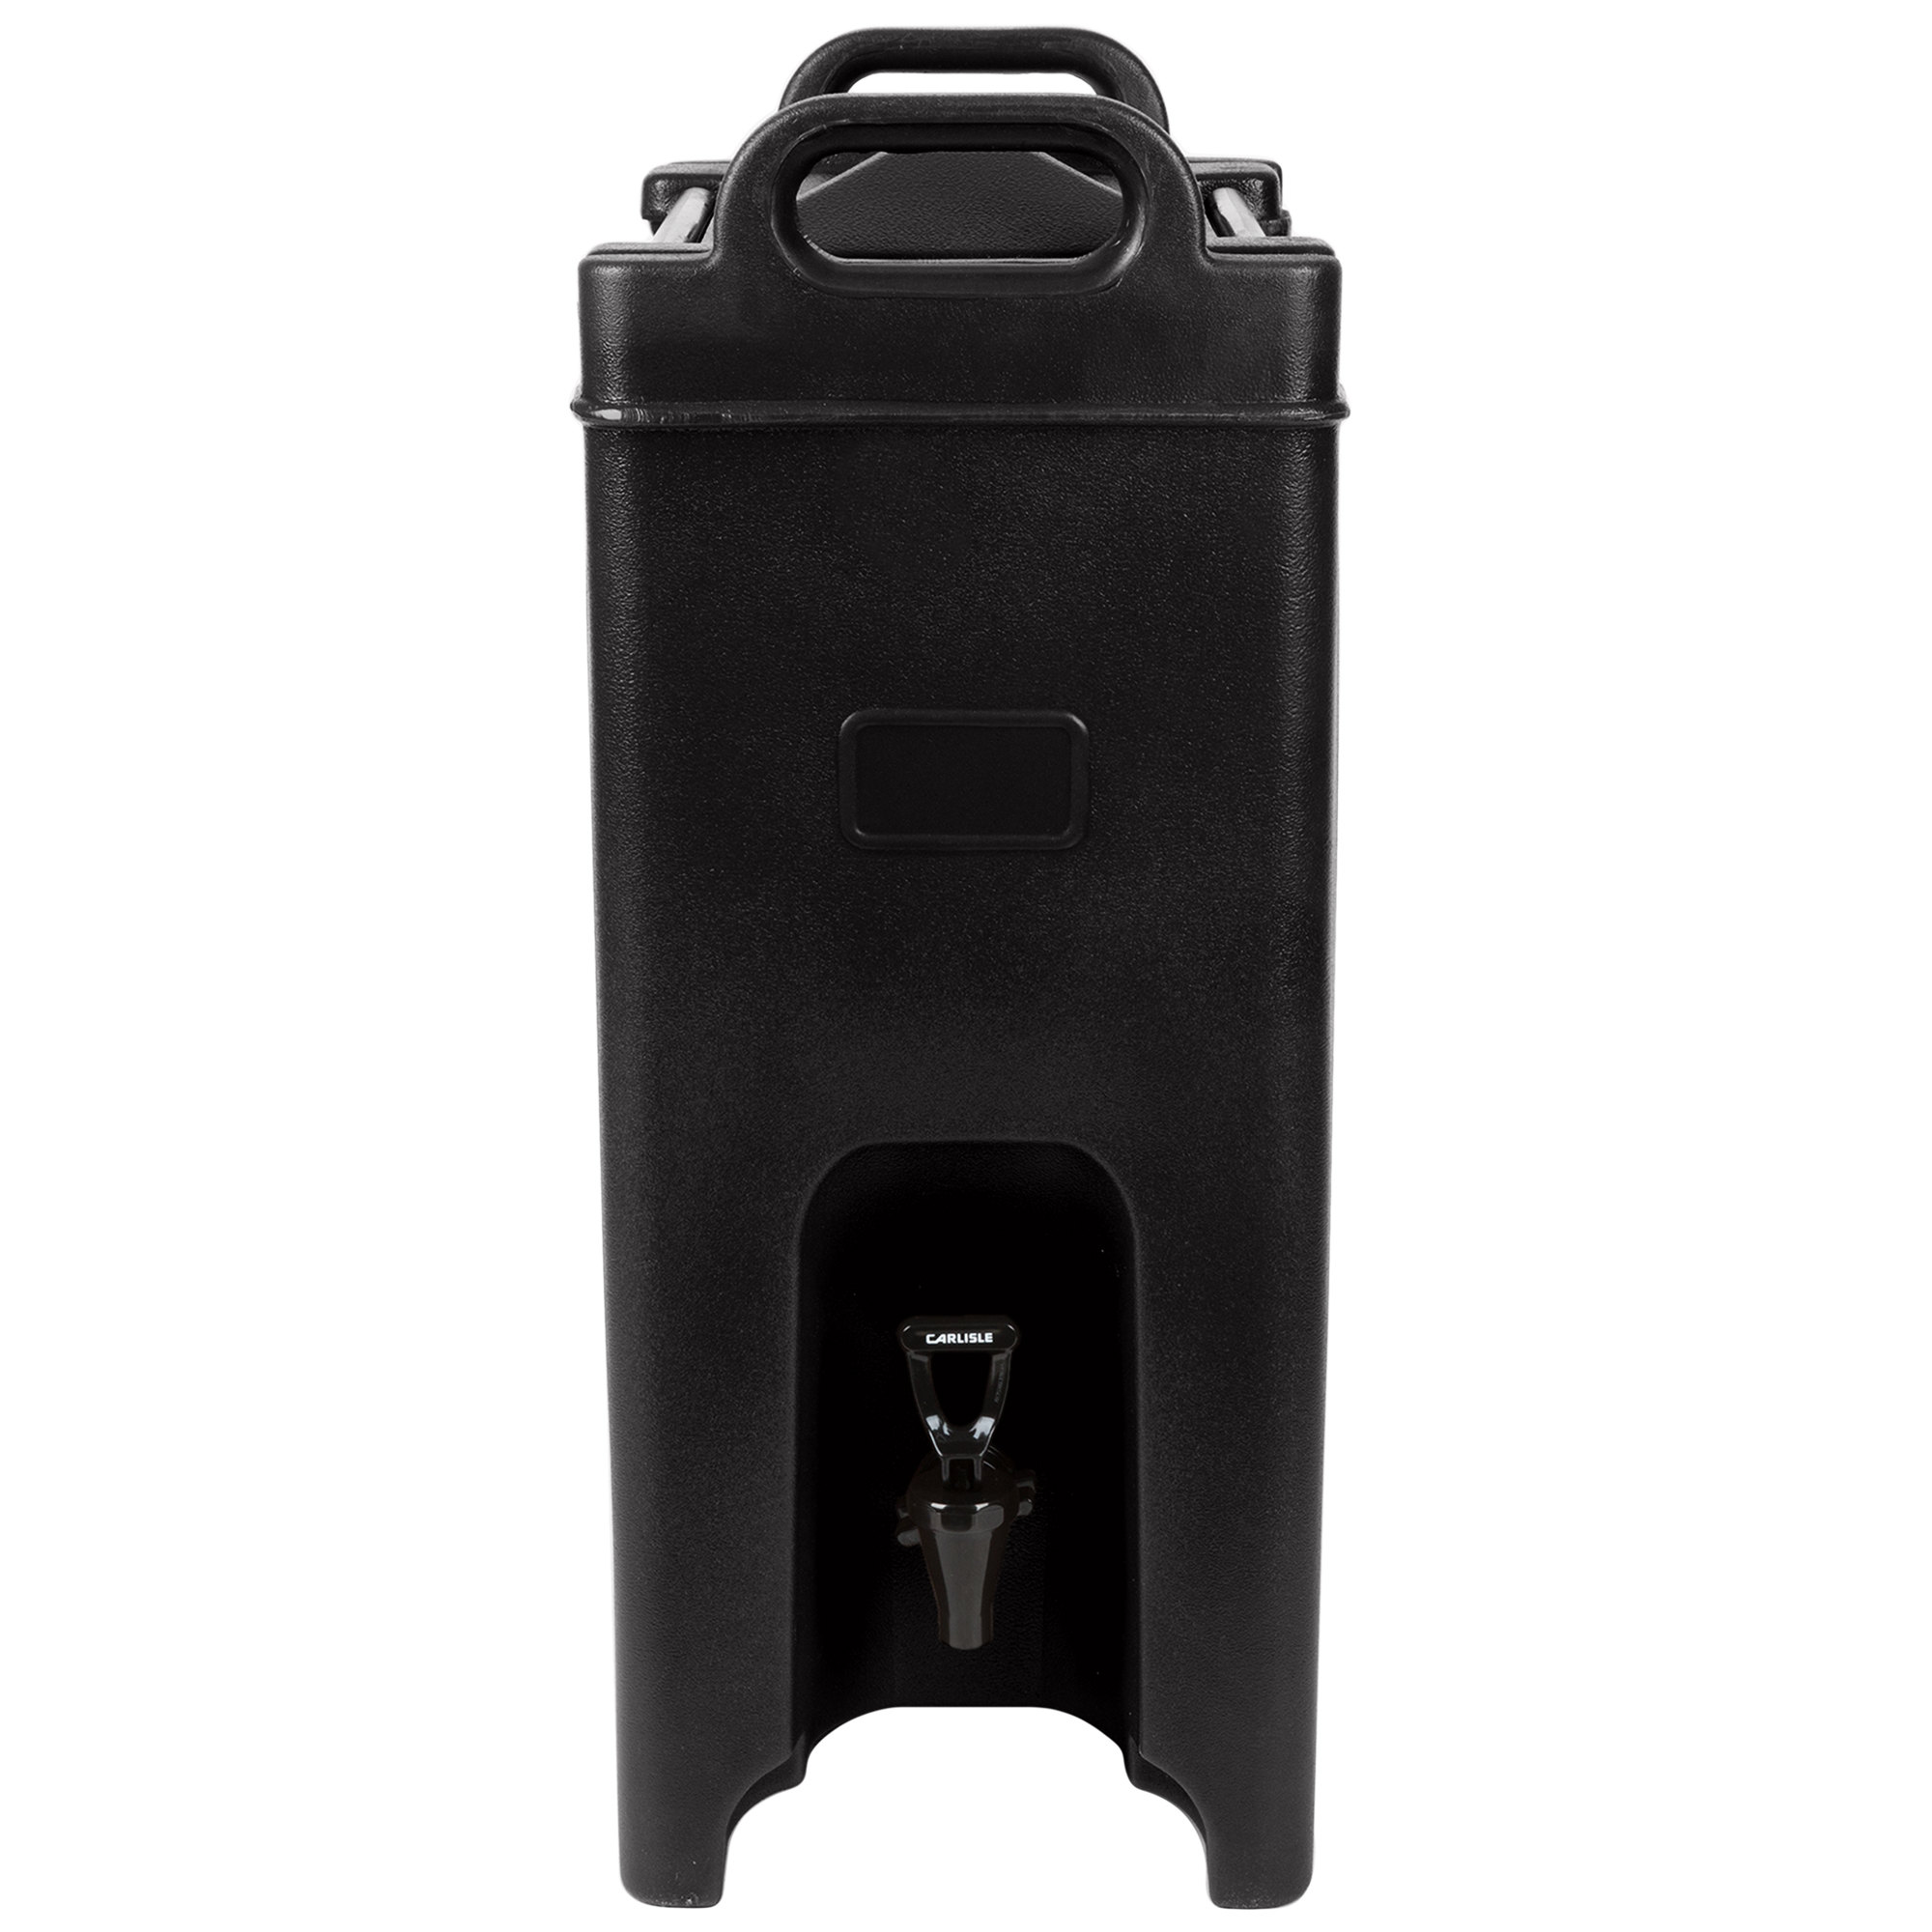 https://magicspecialevents.com/event-rentals/wp-content/uploads/Beverage-Dispenser-Insulated-5-Gallon-for-Hot-or-Cold-5.jpg